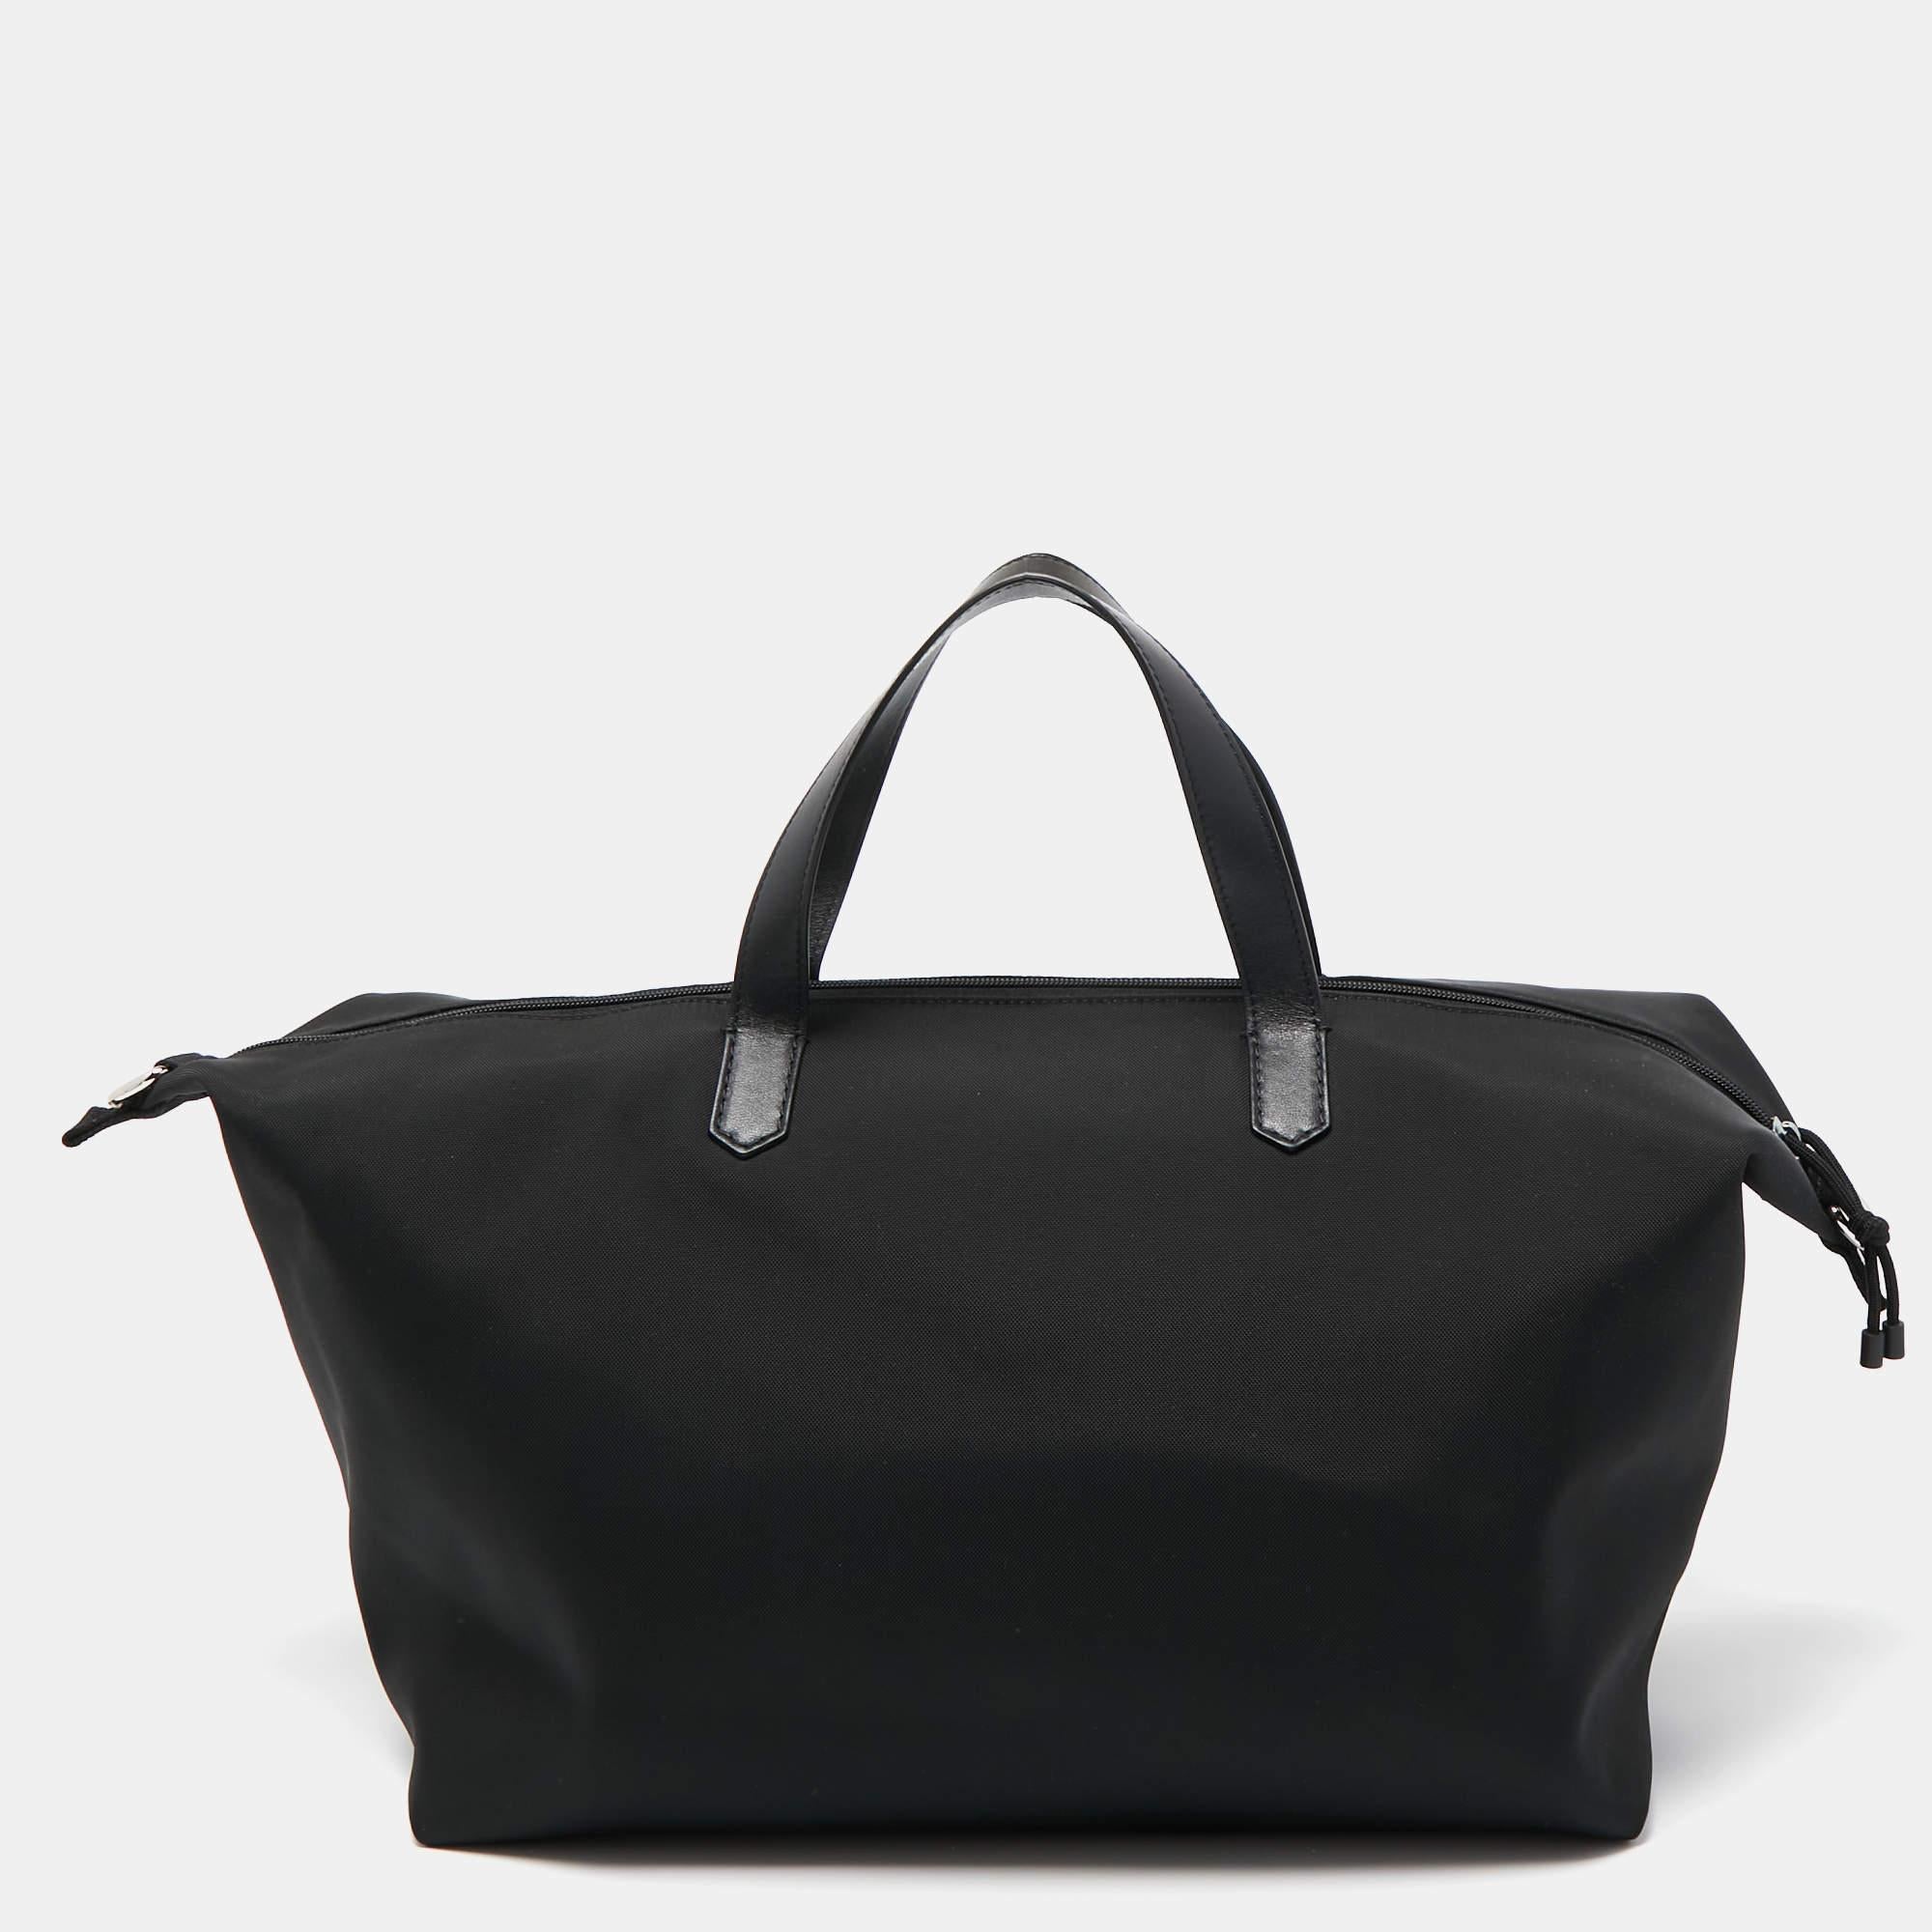 The simple silhouette and the use of durable materials for the exterior bring out the appeal of this Valentino weekender bag. It features comfortable handles and a well-lined interior.

Includes: Original Dustbag, Tag, Detachable Strap, Info Booklet